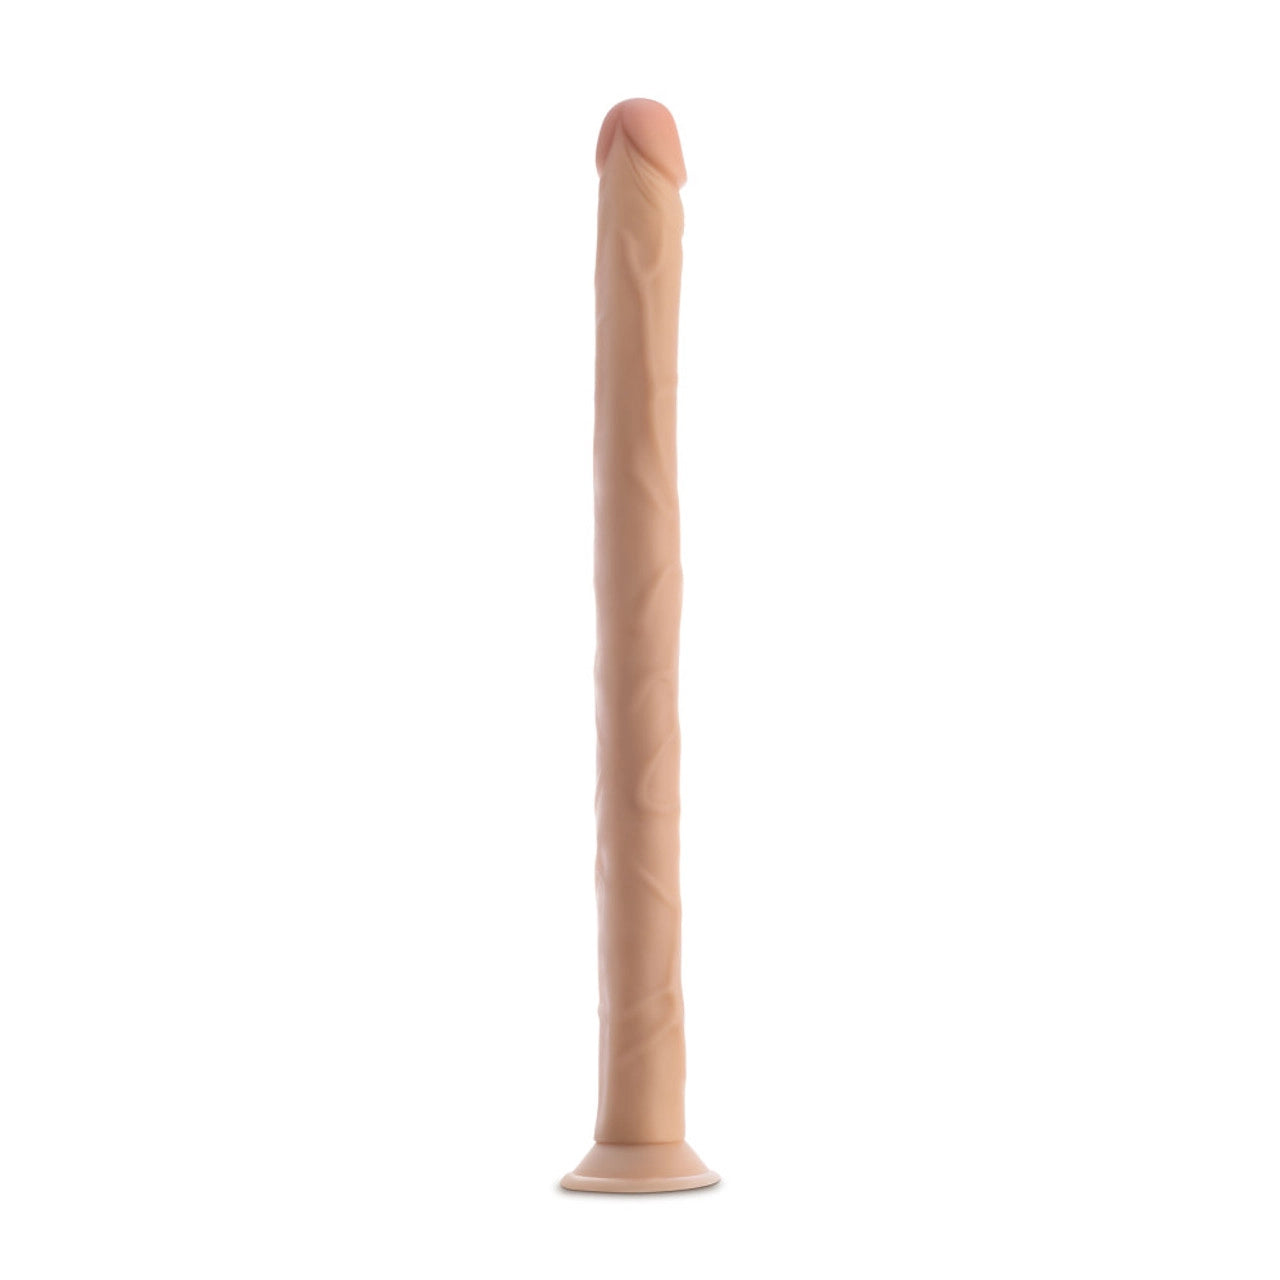 Blush Dr. Skin 19 in. Dildo with Suction Cup